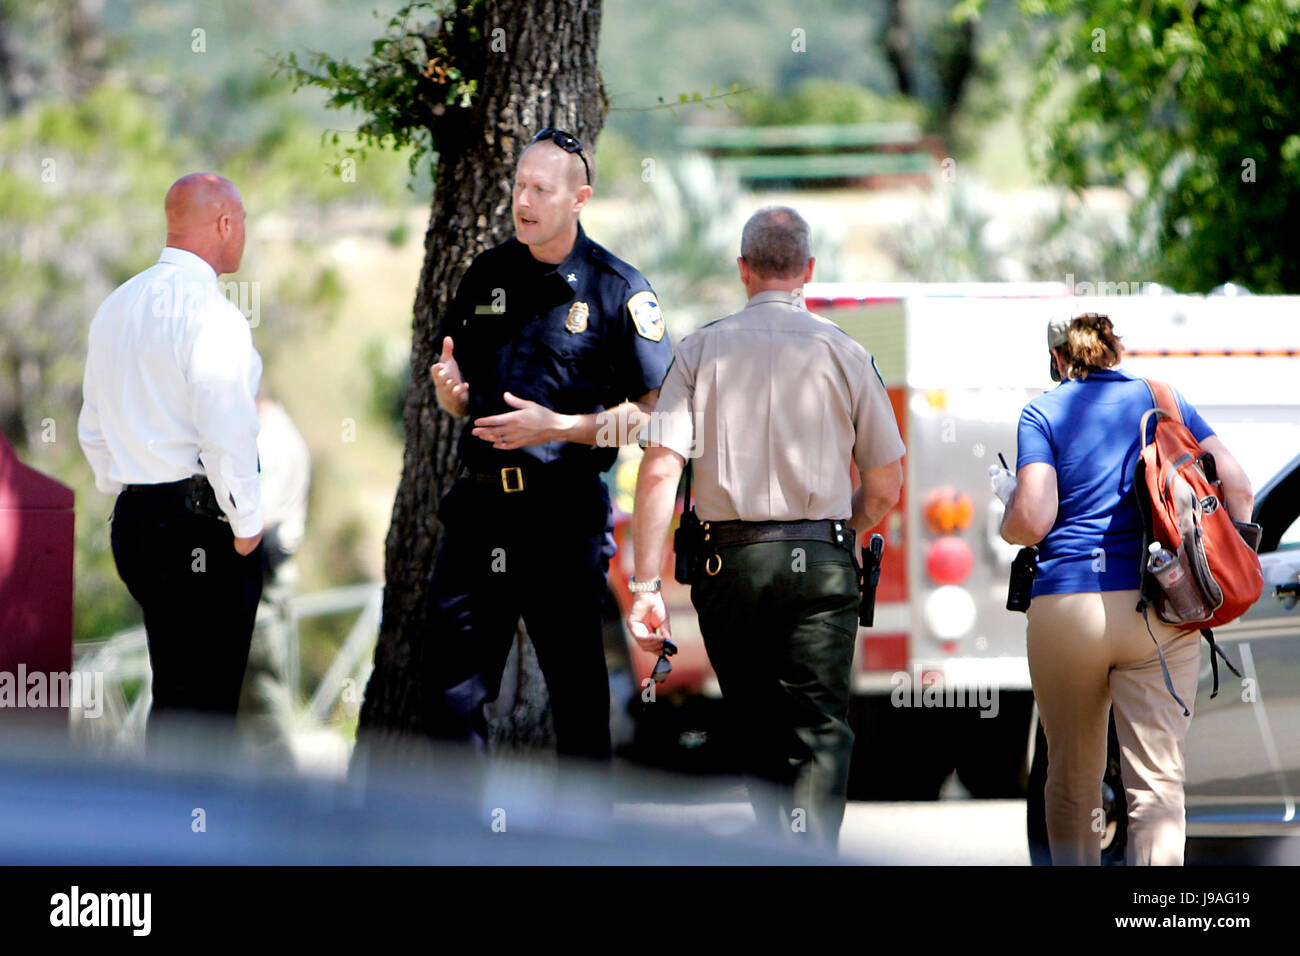 Lake Berryessa, CA, USA. 8th May, 2017. Authorities were investigating a plane crash at Lake Berryessa on Monday. The crash occurred near Pleasure Cove Marina and Markley Cove Resort in an area of the lake that could only be reached by boat. Credit: Napa Valley Register/ZUMA Wire/Alamy Live News Stock Photo